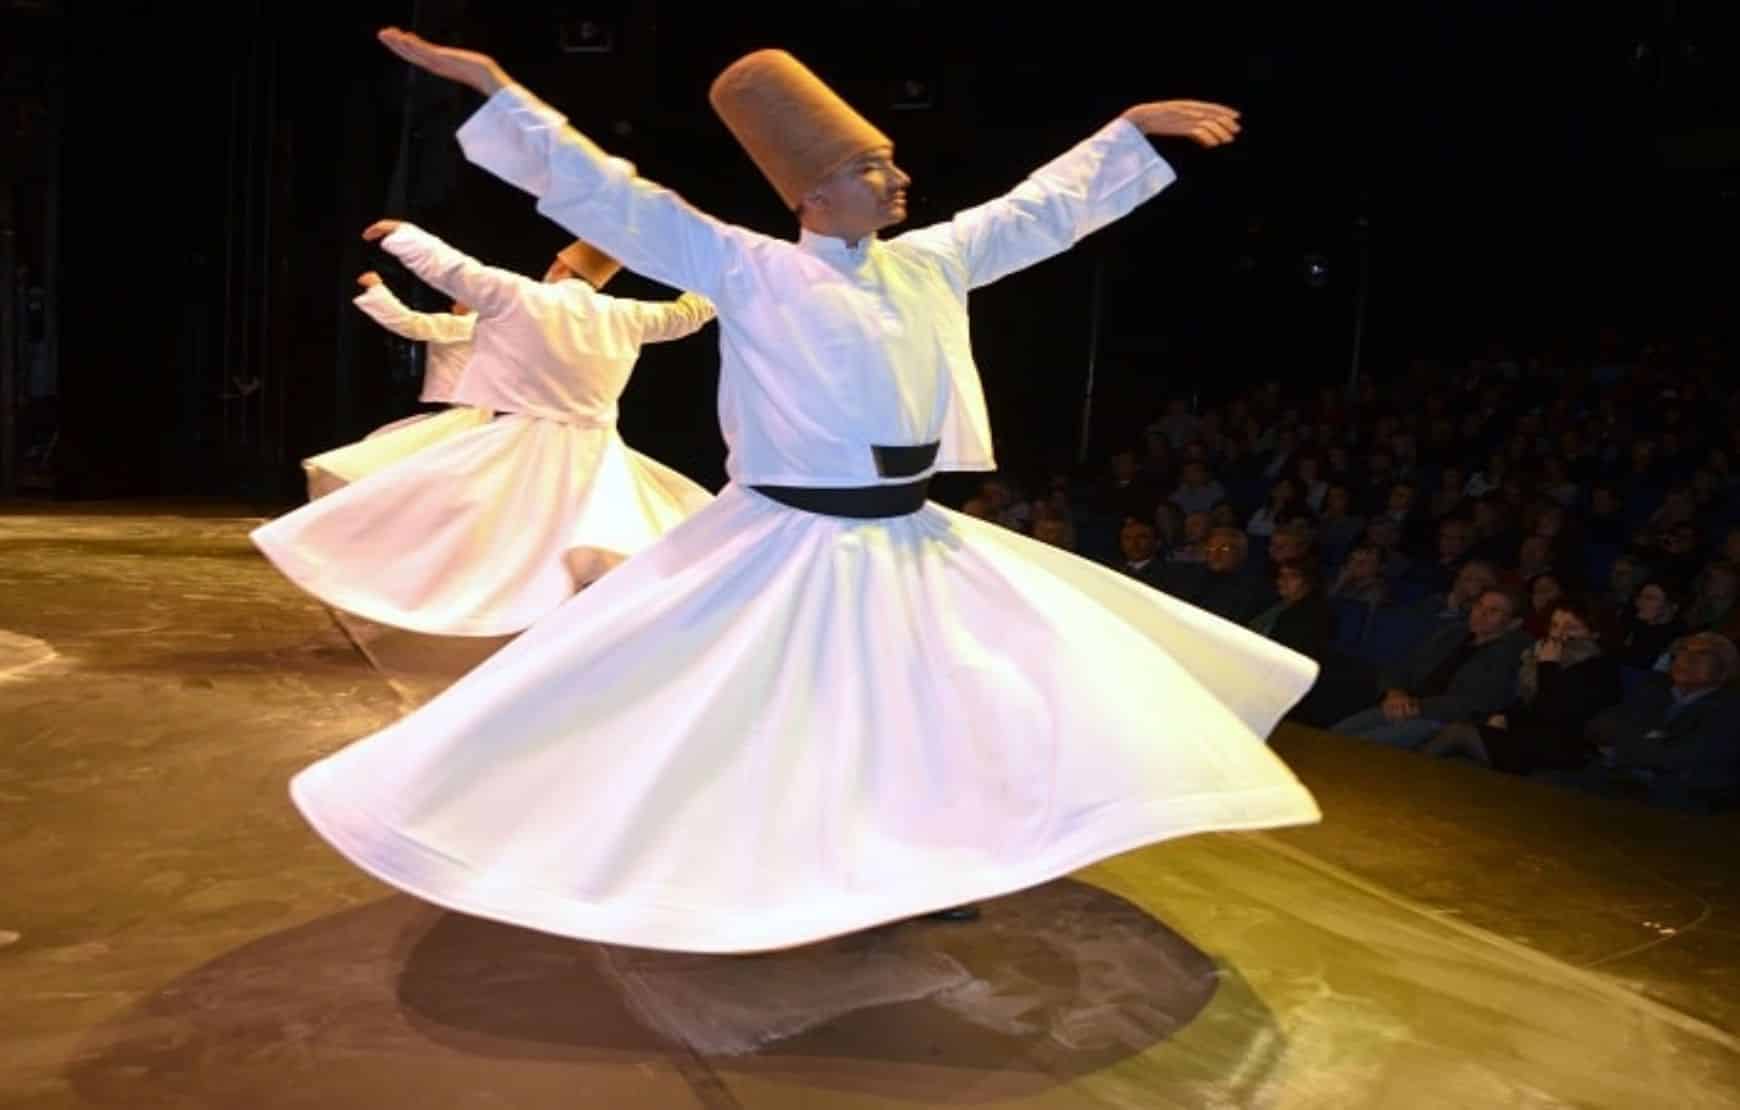 Dervish ceremony in cappadocia - whirling dervishes and sufism